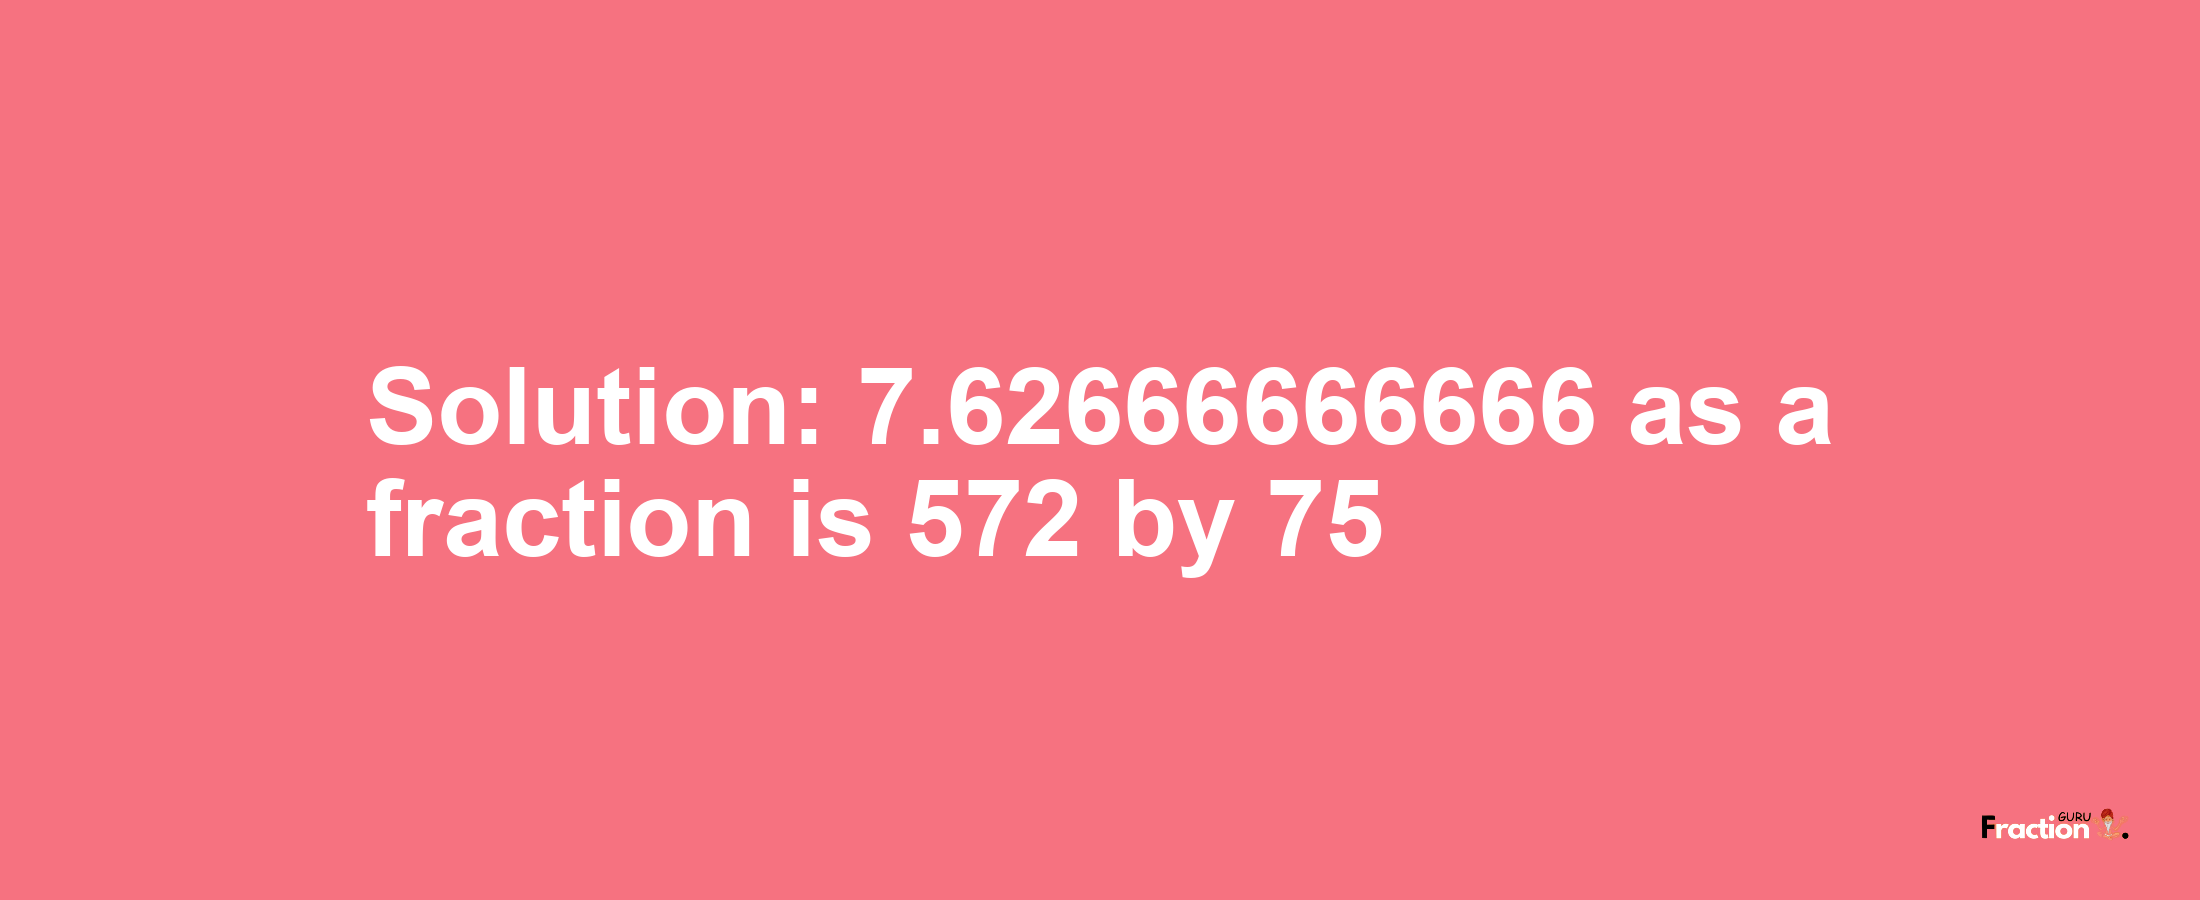 Solution:7.62666666666 as a fraction is 572/75